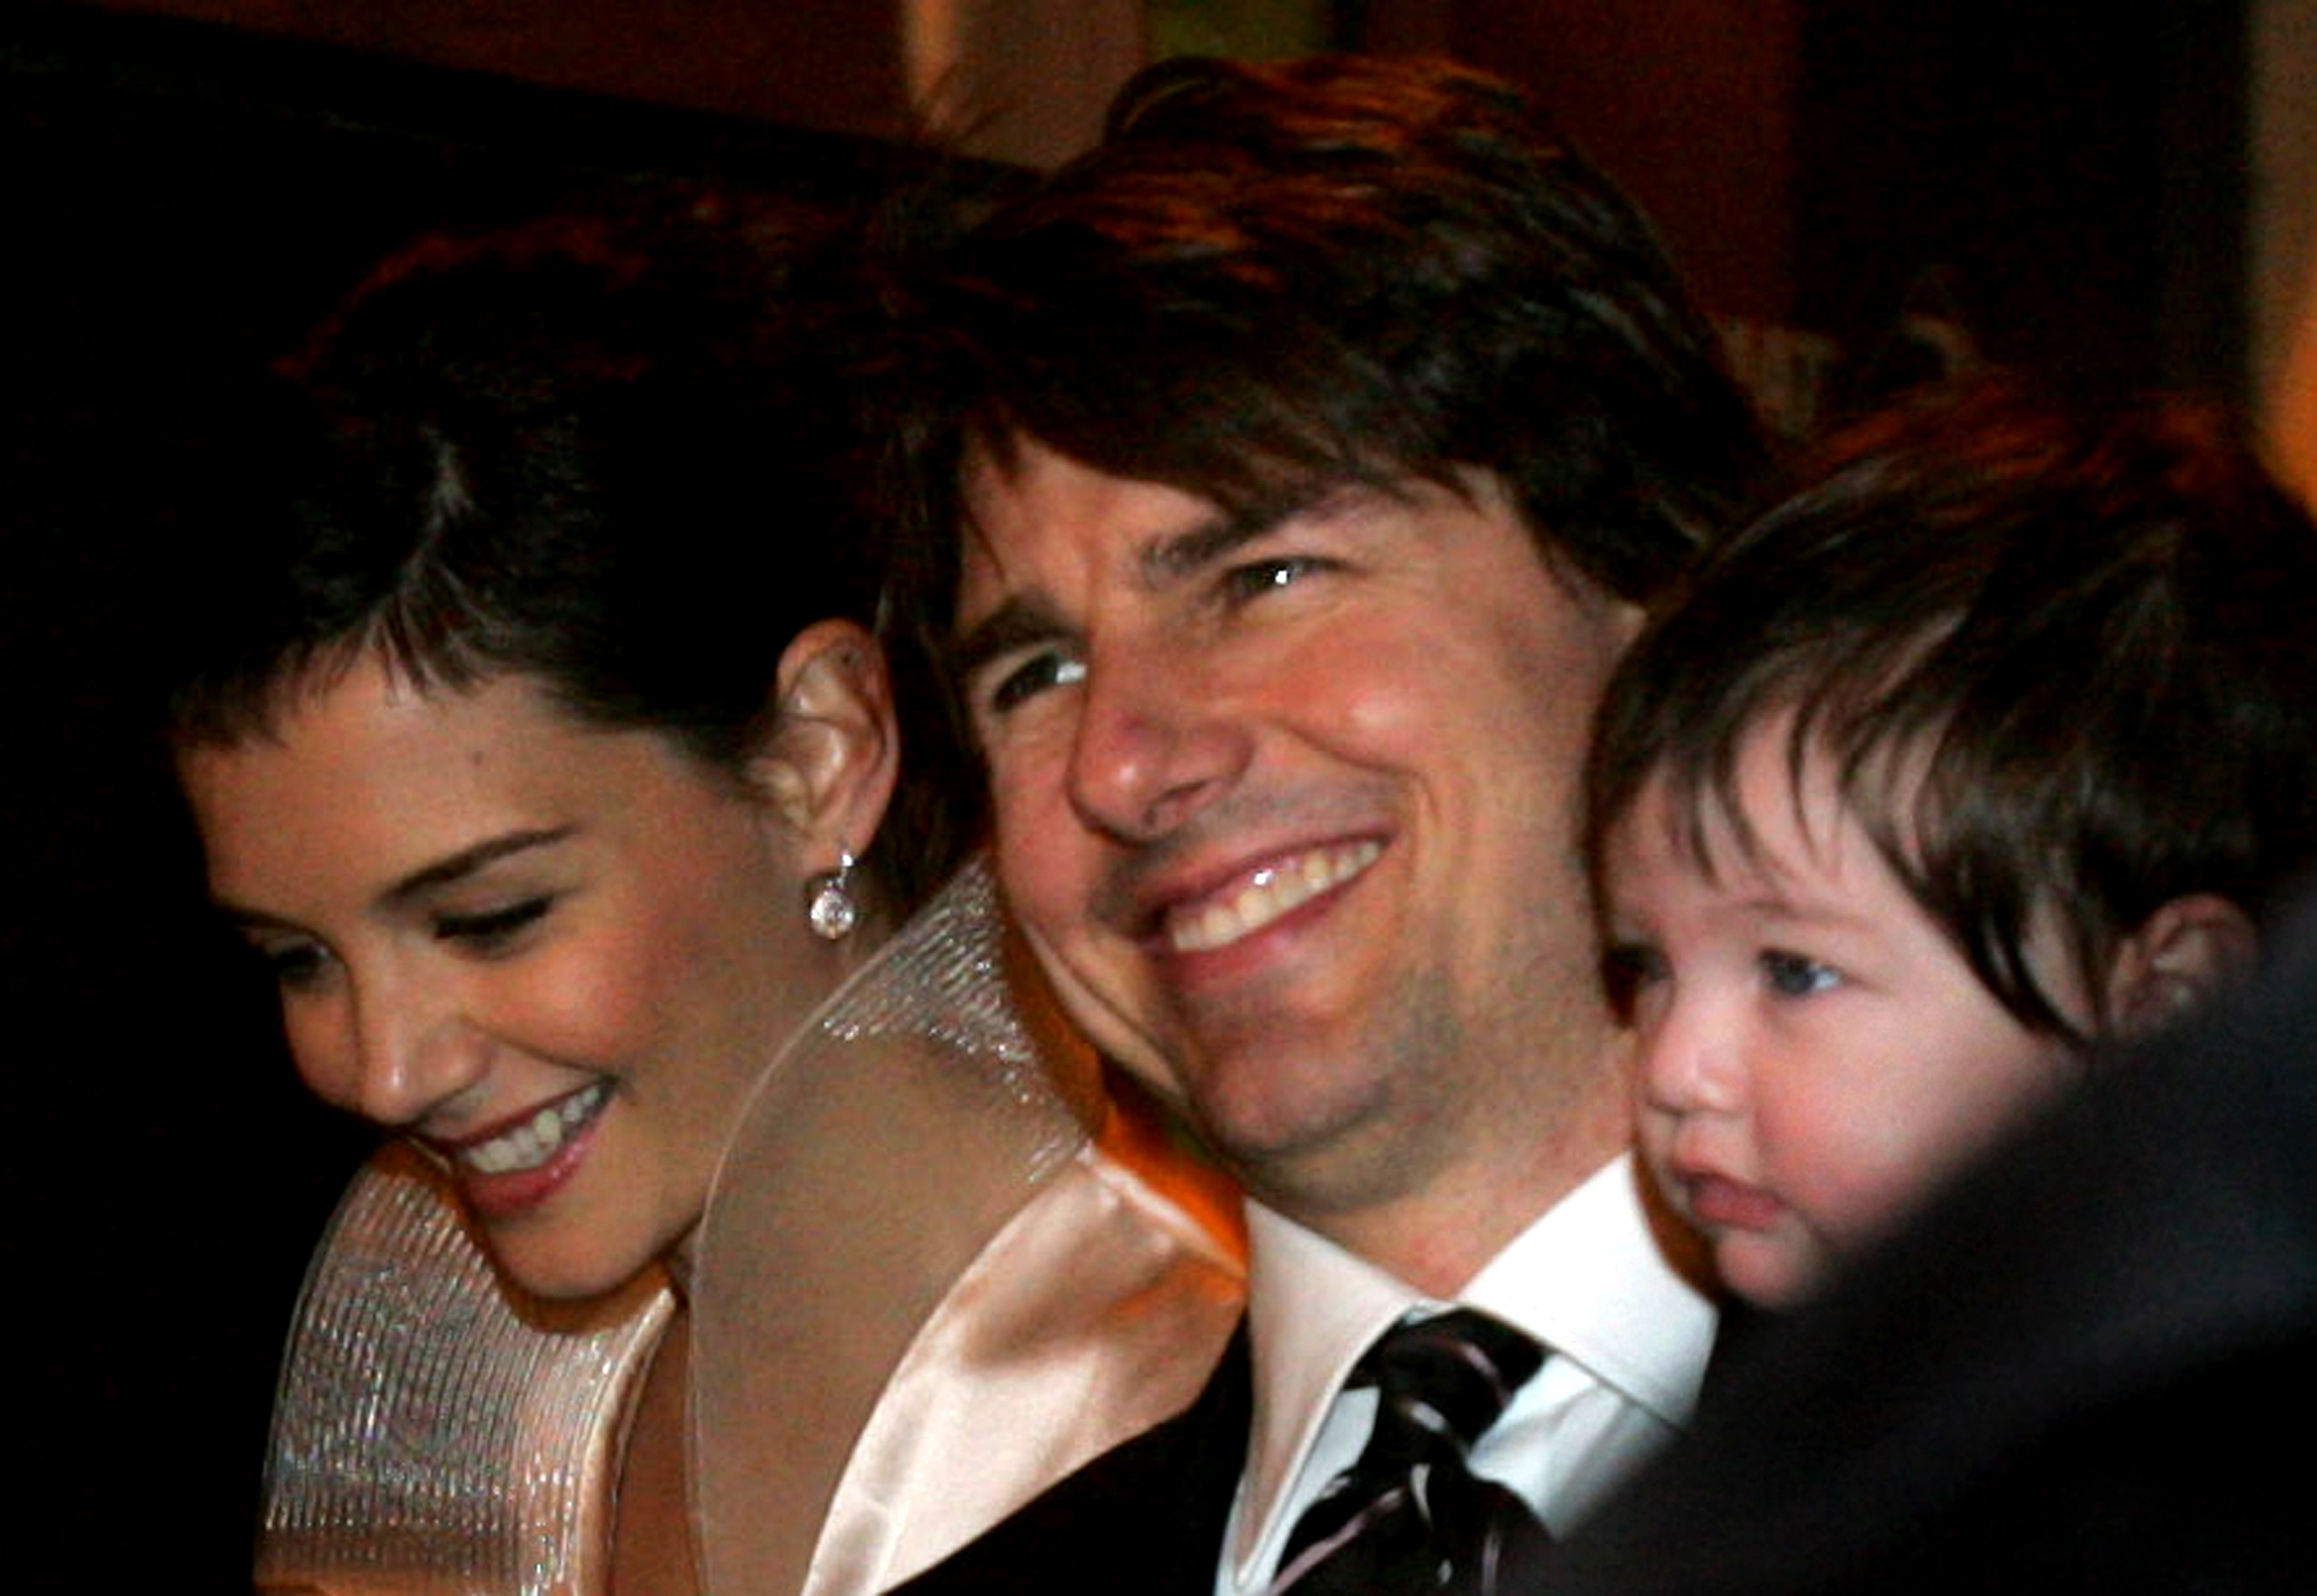 Katie Holmes, Tom and Suri Cruise arrive at the restaurant 'Nino' on November 16, 2006 in Rome, Italy. | Source: Getty Images